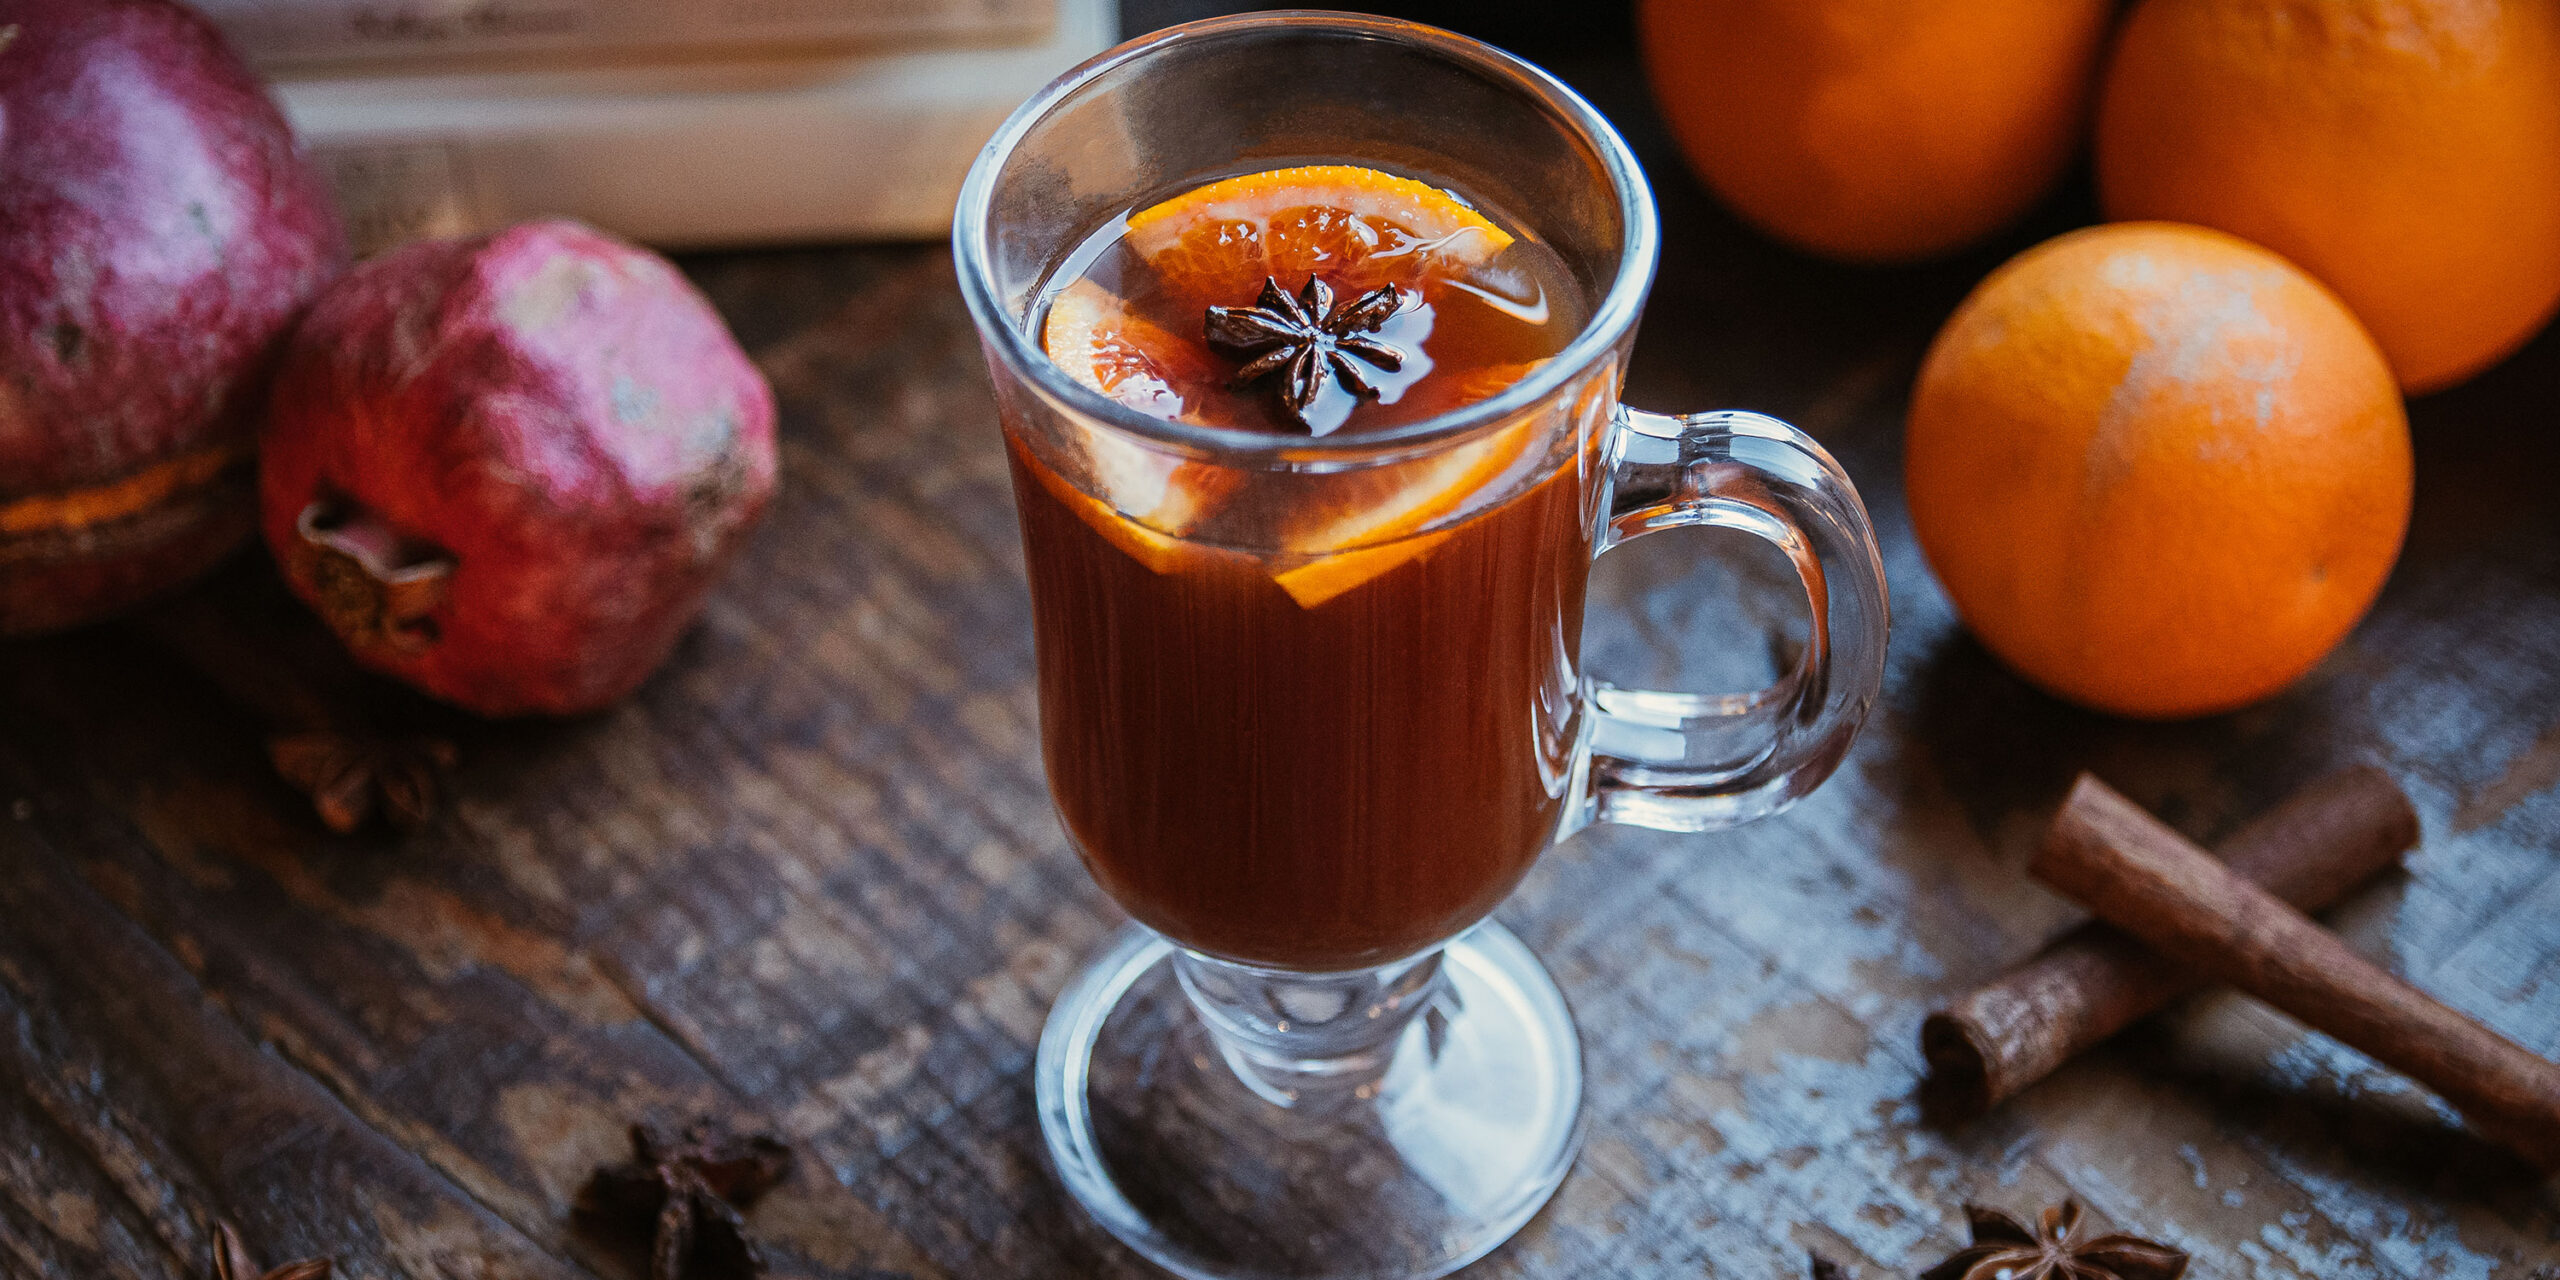 Mug of Mulled Vya with pomegranates and oranges and cinnamon sticks